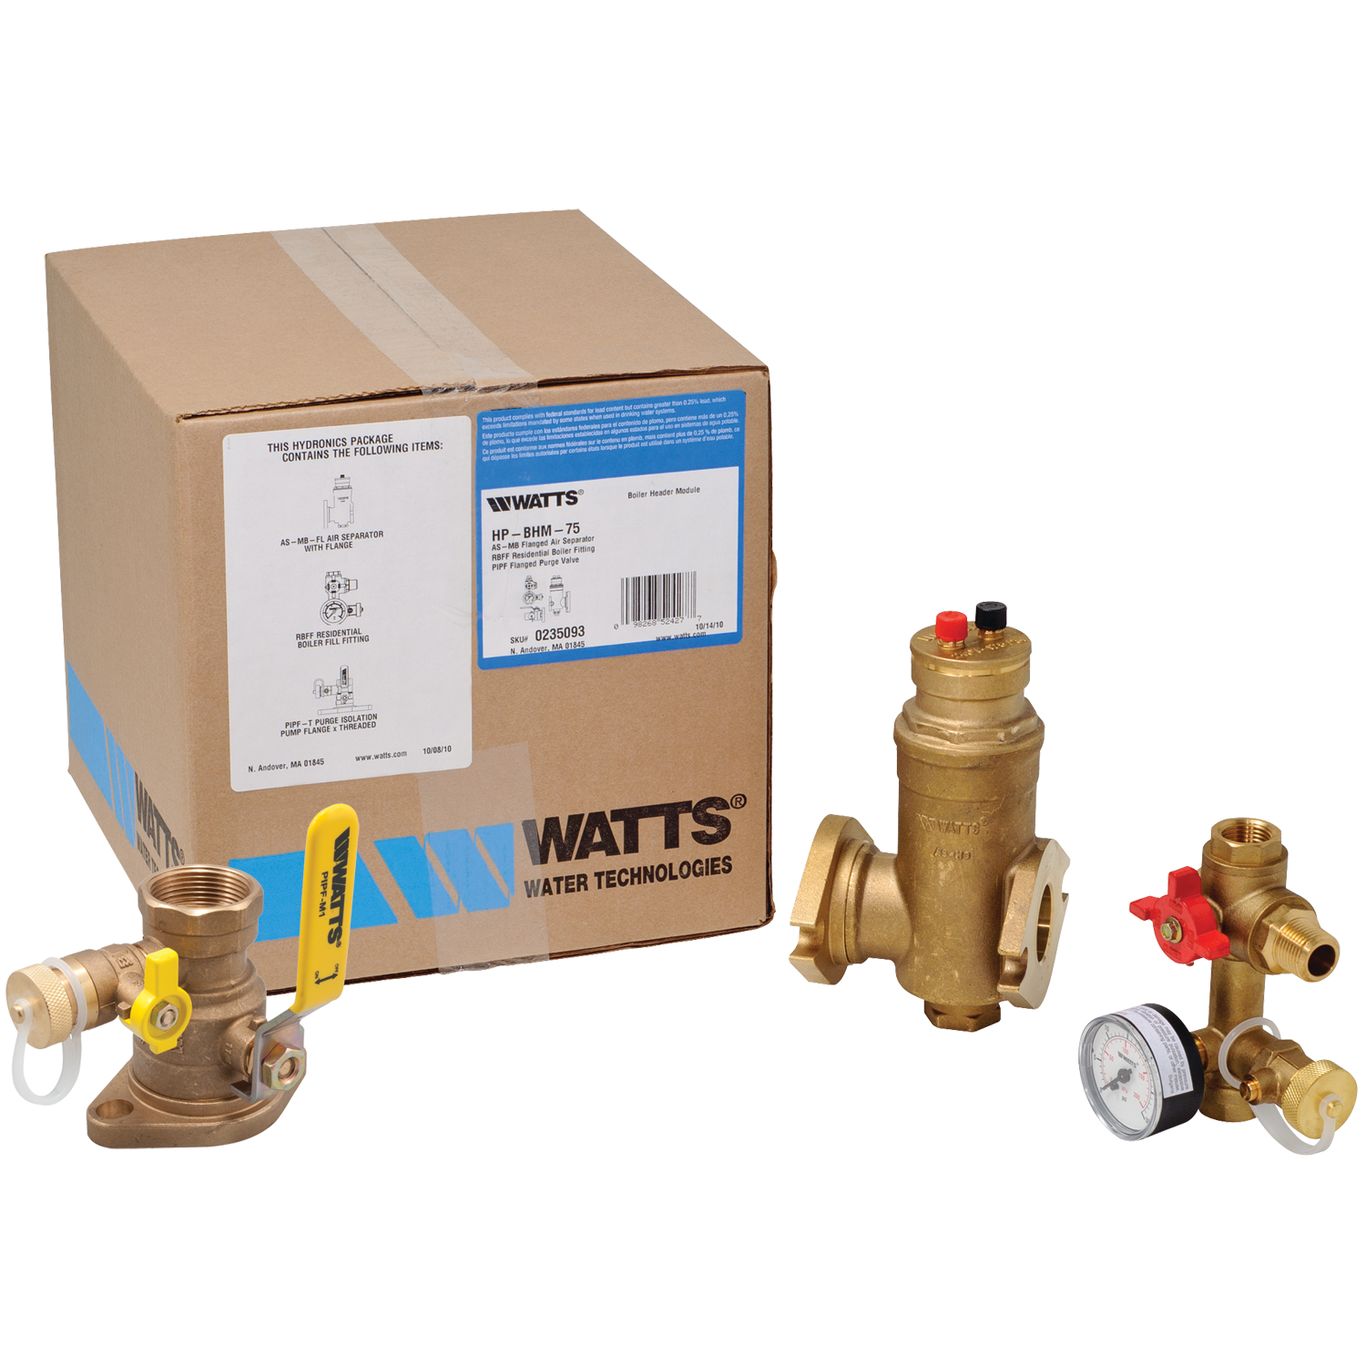 Boiler Installations Hydronic Package Kit, Flanged Air Connection, 1 Inch Size